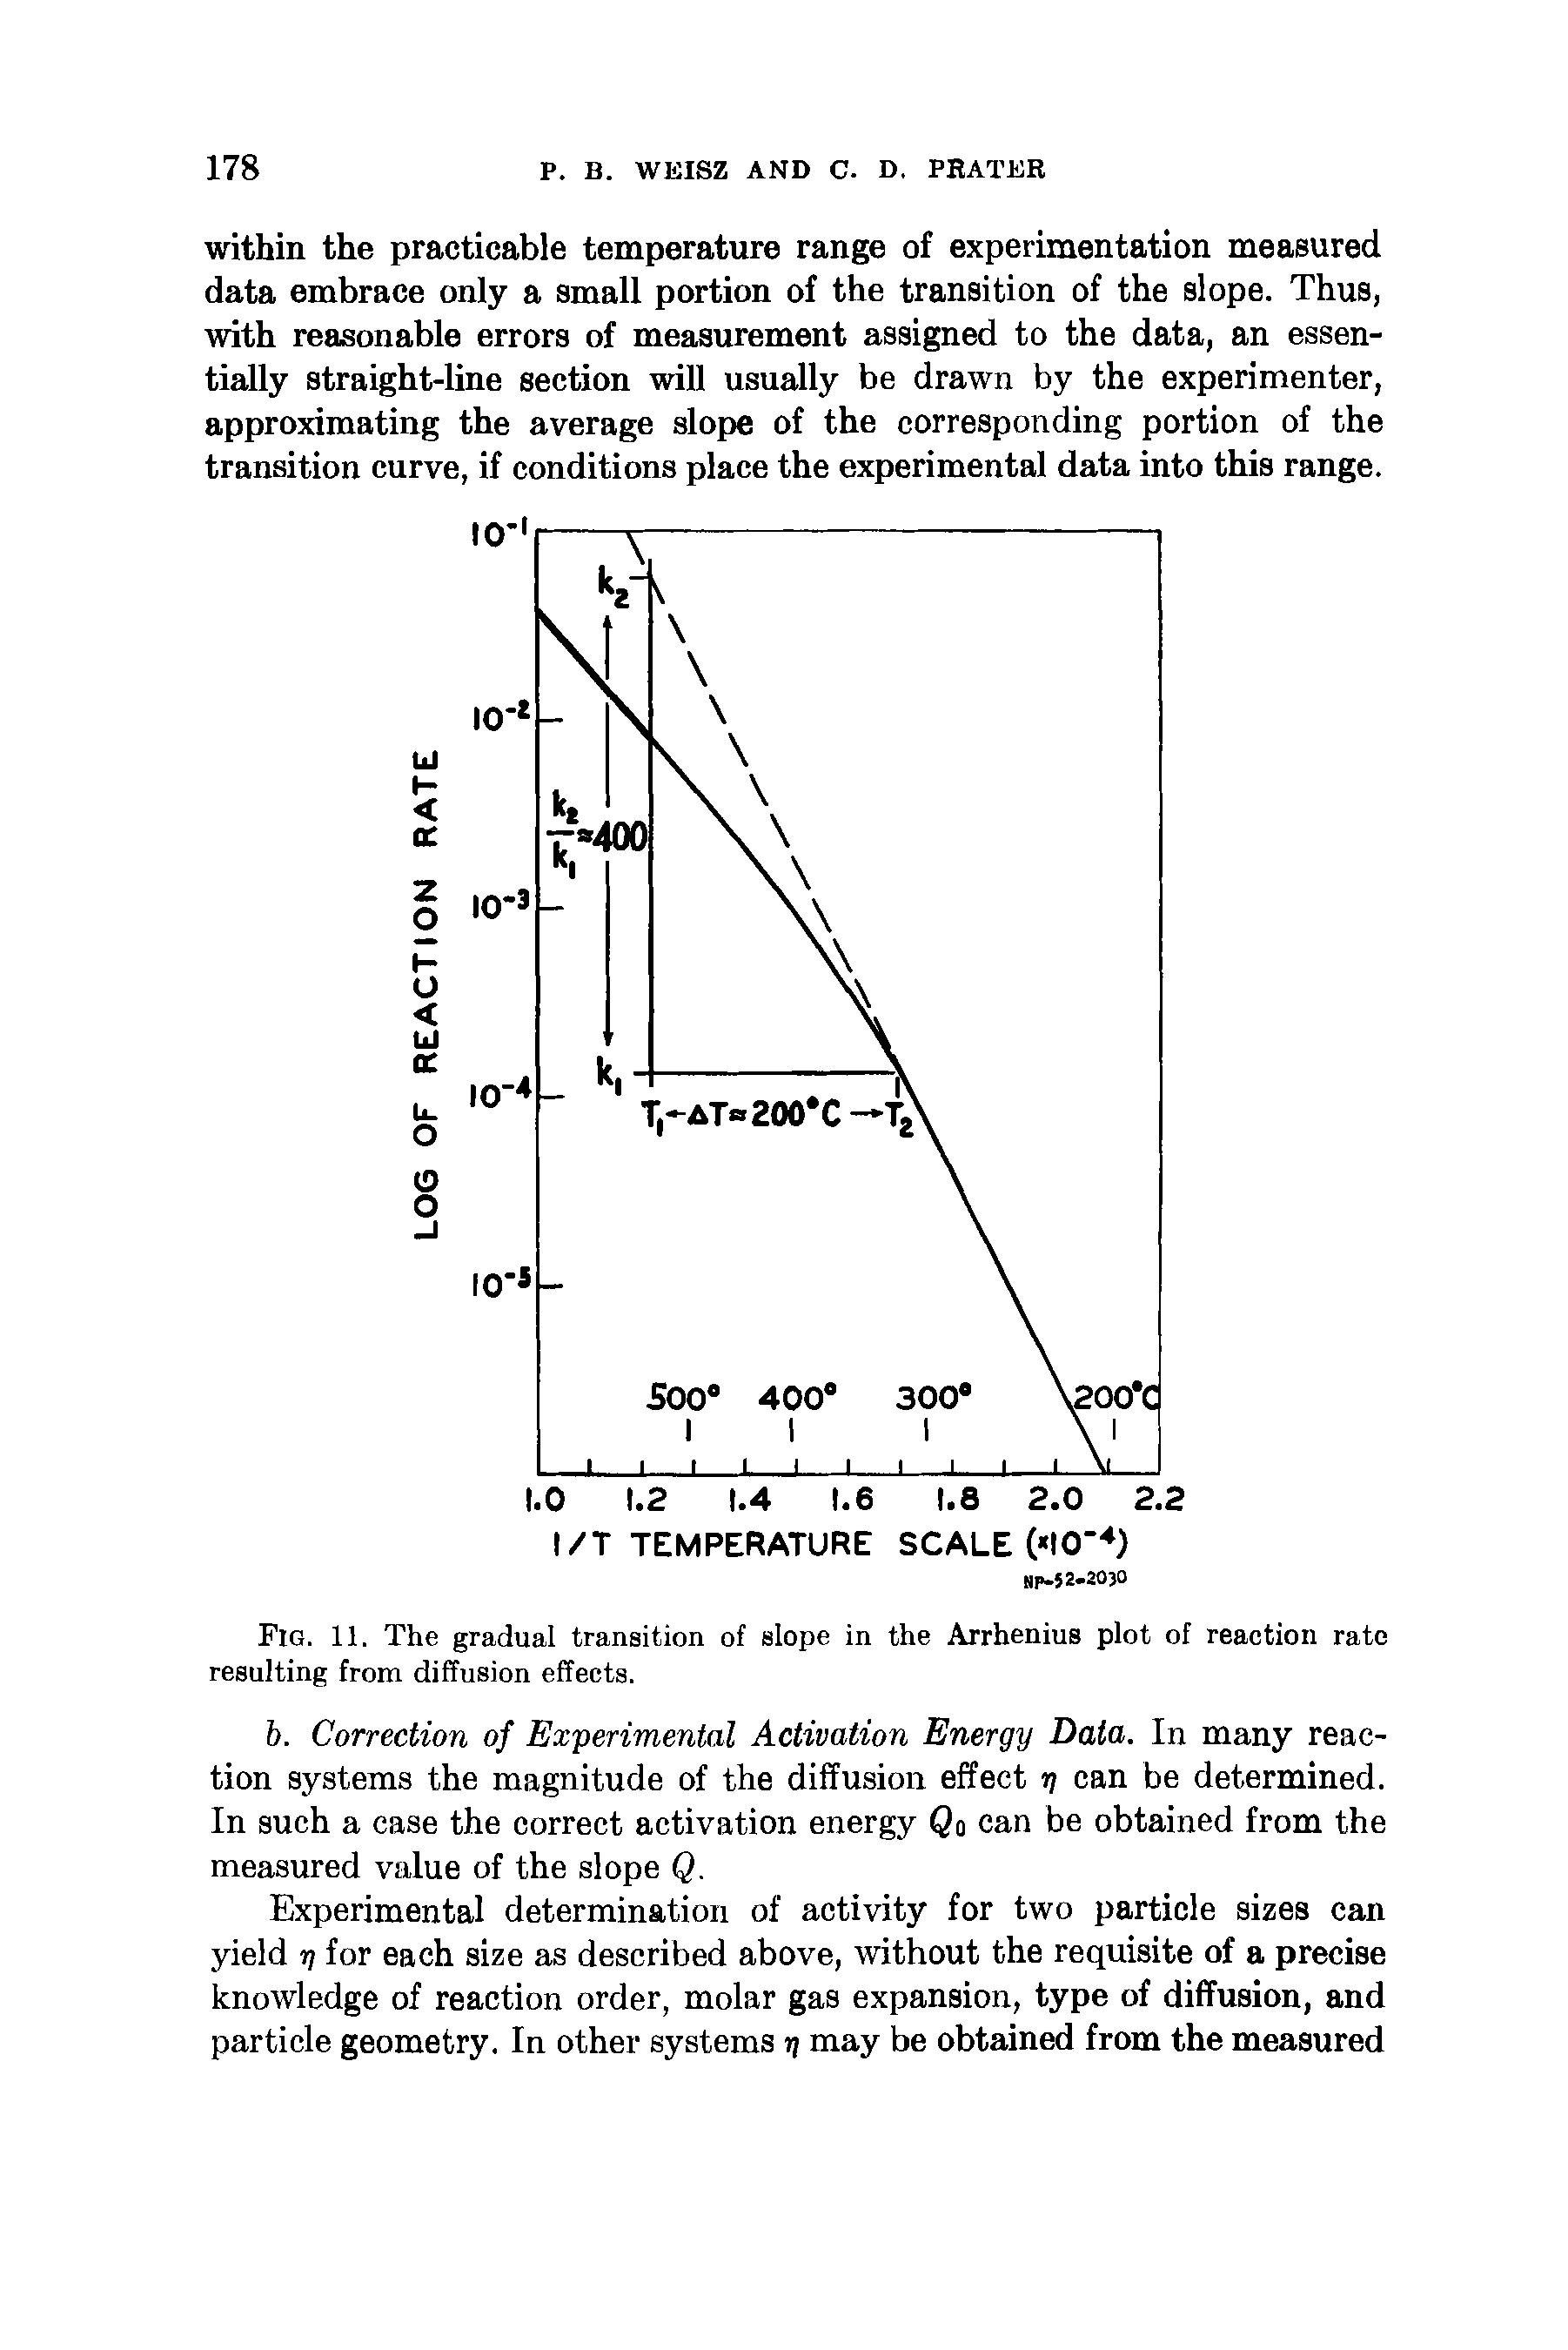 Fig. 11. The gradual transition of slope in the Arrhenius plot of reaction rate resulting from diffusion effects.